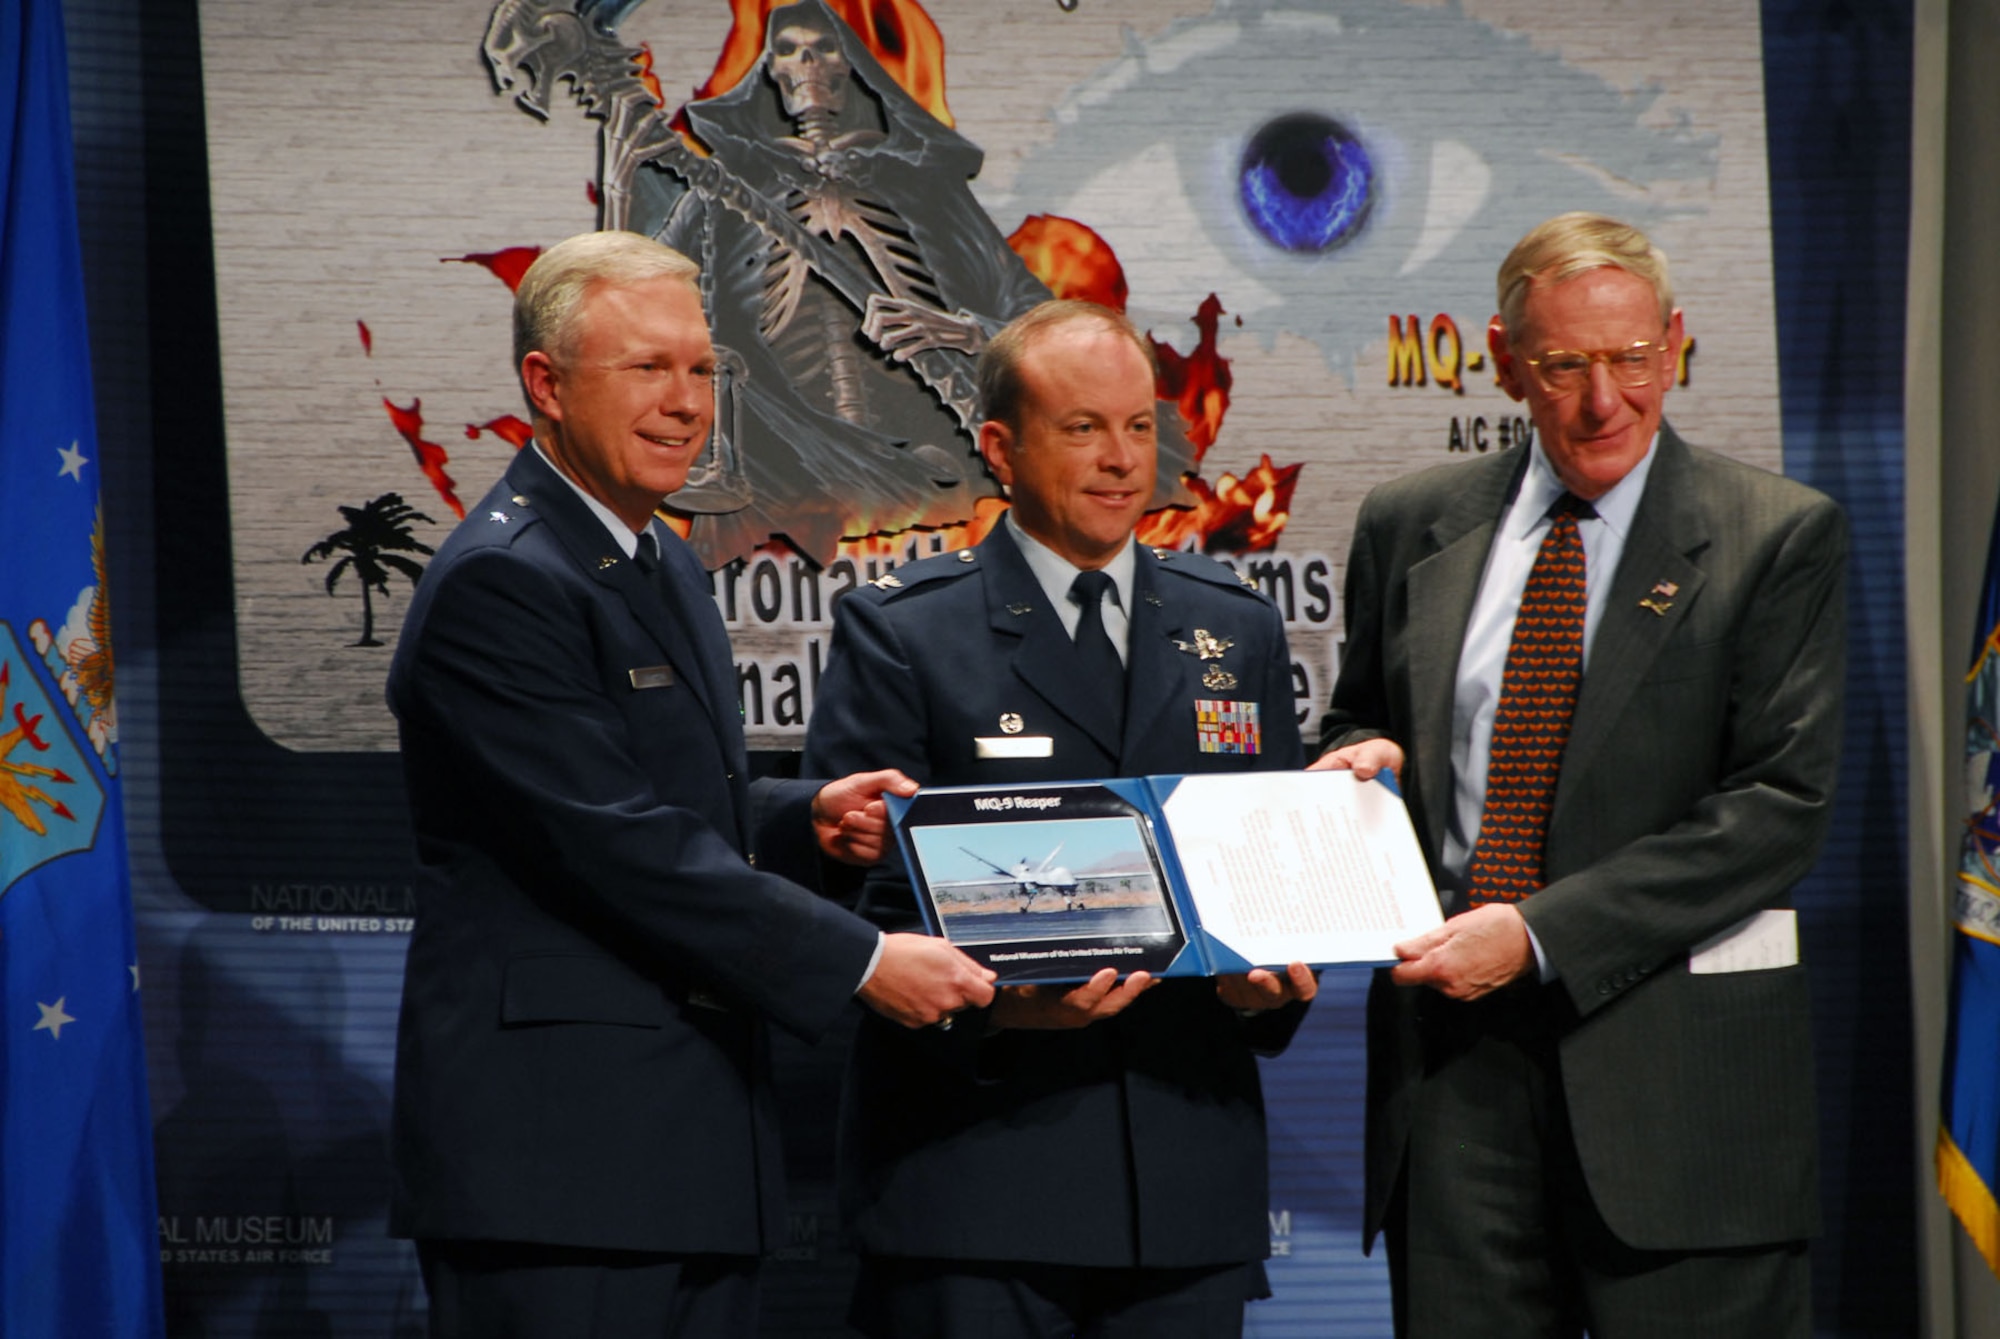 DAYTON, Ohio -- (left to right) Brig. Gen. John F. Thompson, the Air Force’s Program Executive Officer for Intelligence, Surveillance and Reconnaissance and Commander of the 303rd Aeronautical Systems Wing; Col. Christopher Coombs, Commander of the 703rd Aeronautical Systems Group; and Museum Director Maj. Gen. (Ret.) Charles D. Metcalf participate in the MQ-9 Reaper exhibit opening at the National Museum of the U.S. Air Force on Jan. 25, 2010. (U.S. Air Force photo)